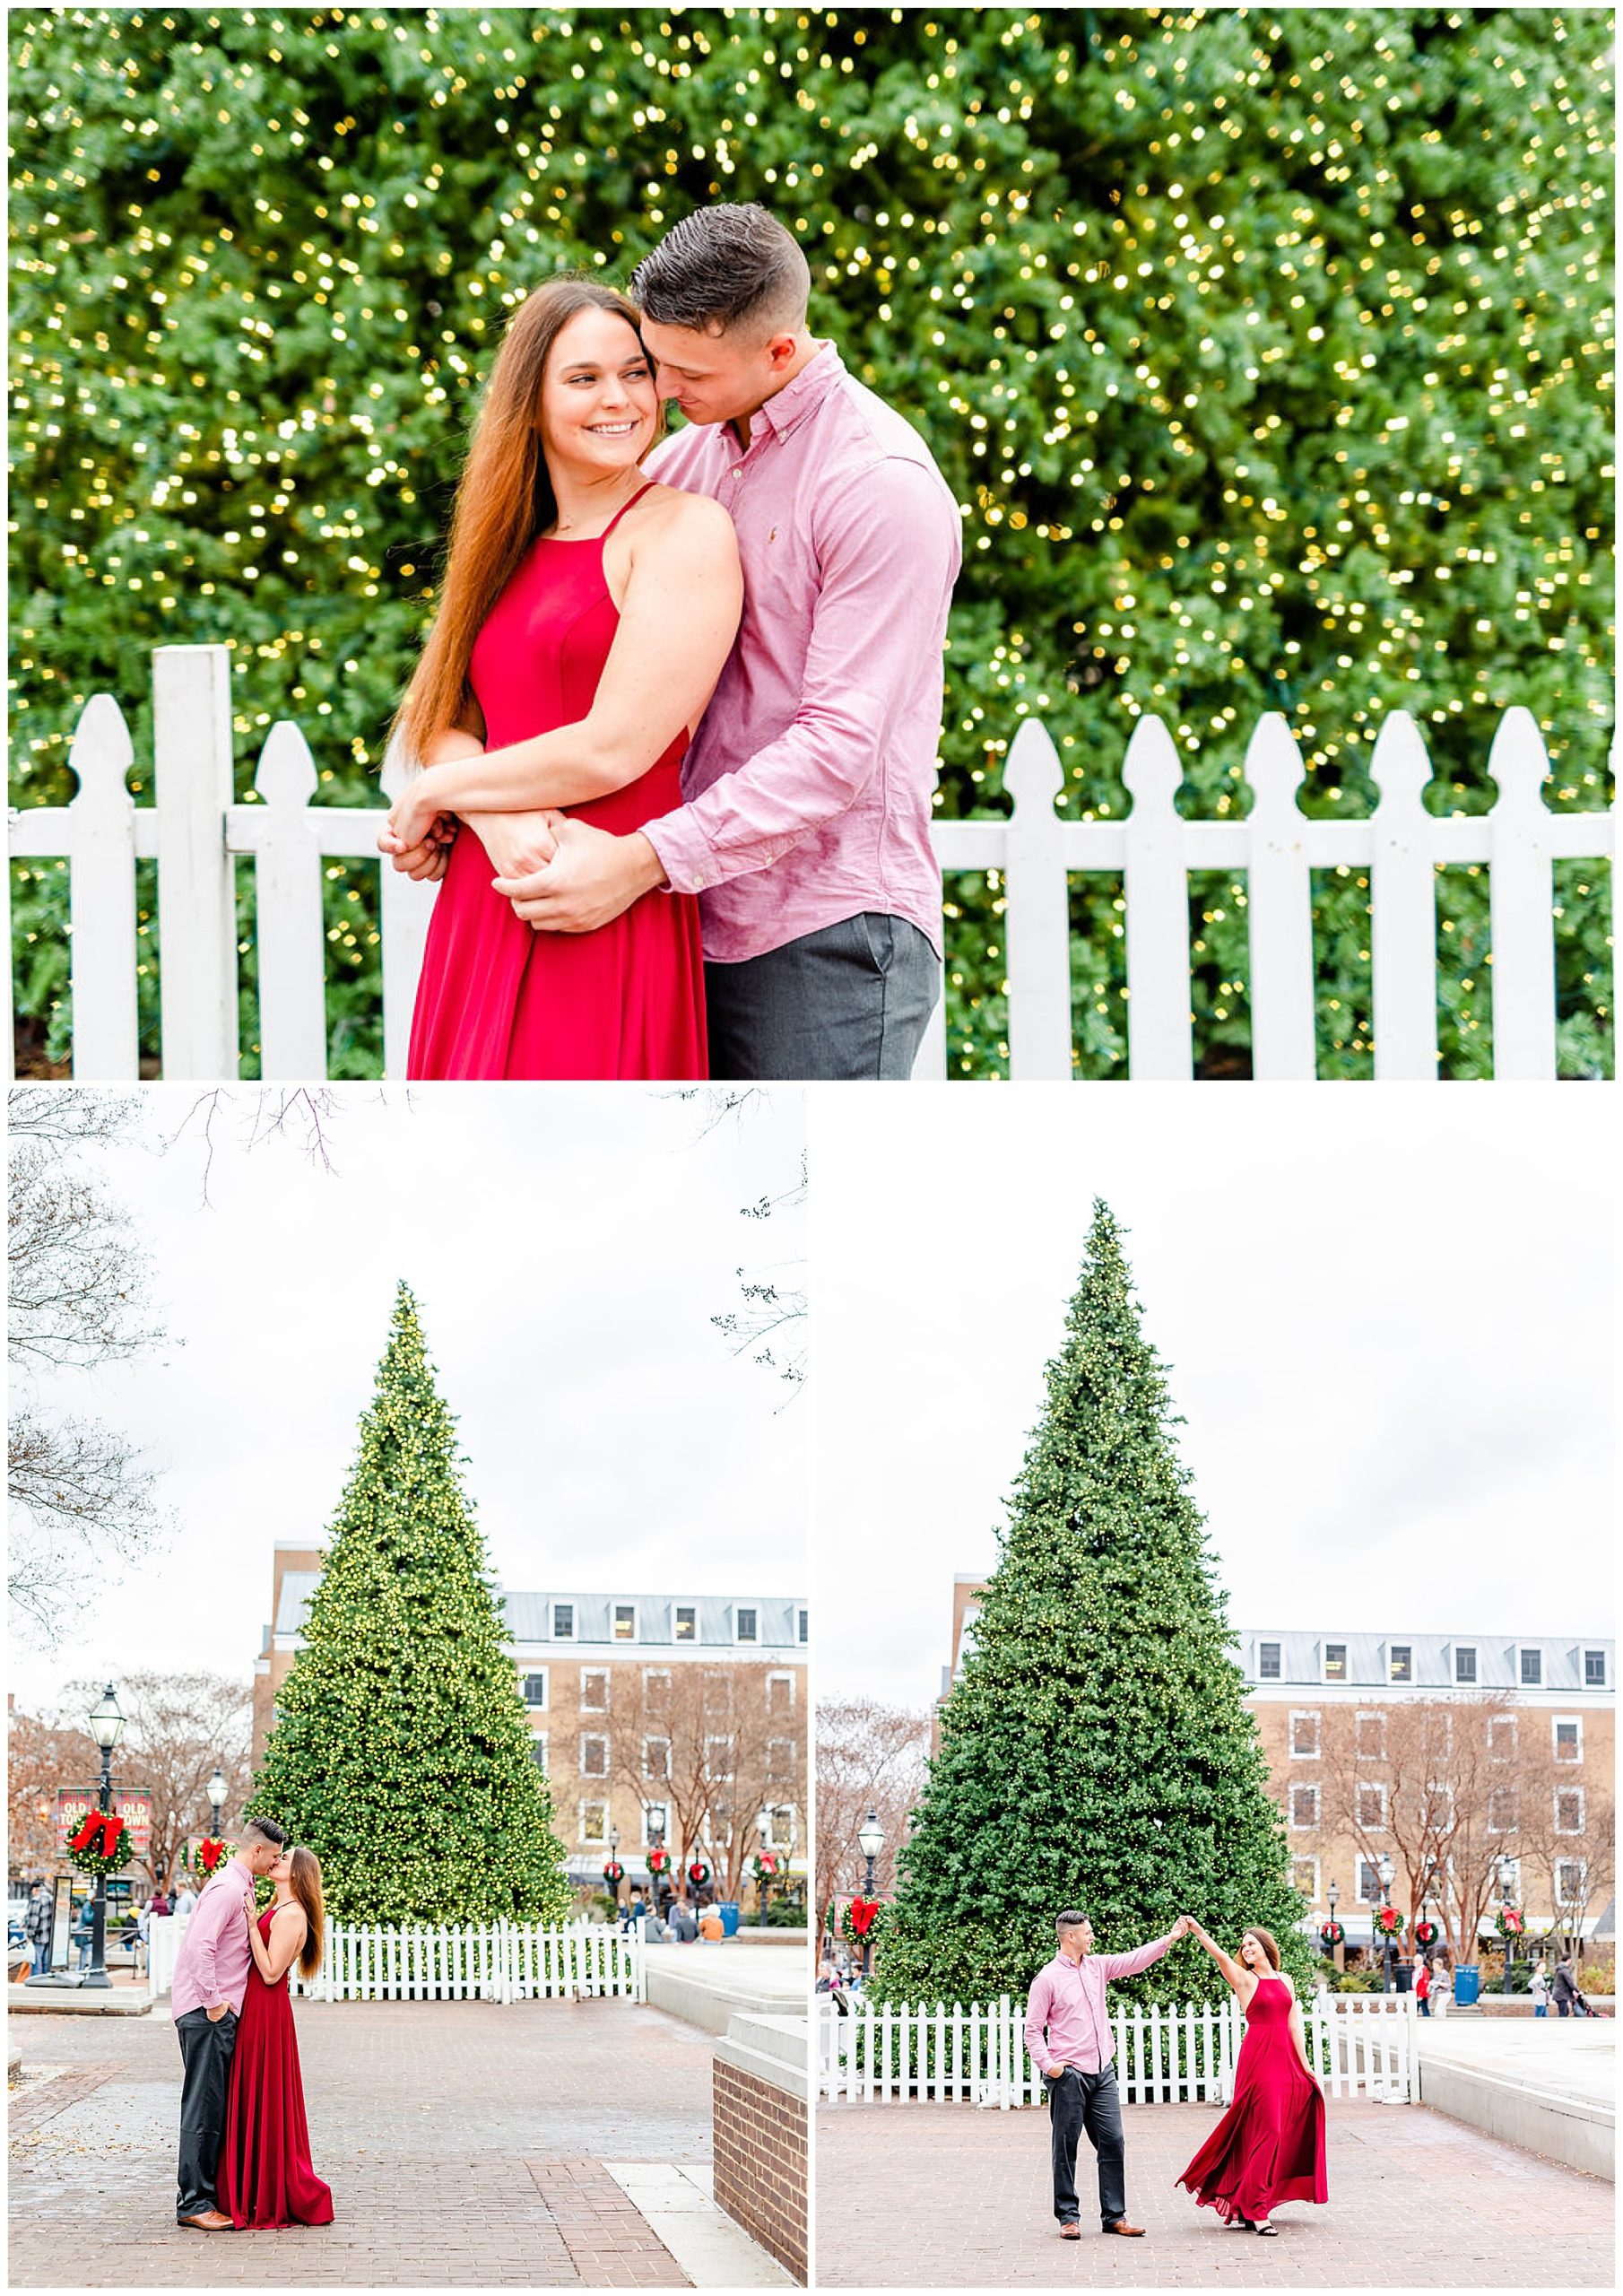 winter Alexandria engagement session, Alexandria engagement photos, Alexandria Virginia portraits, Old Town Alexandria engagement photos, winter engagement photos, Christmas engagement photos, semi-formal engagement photos, Rachel E.H. Photography, couple kissing in front of christmas tree, couple dancing, man hugging woman from behind